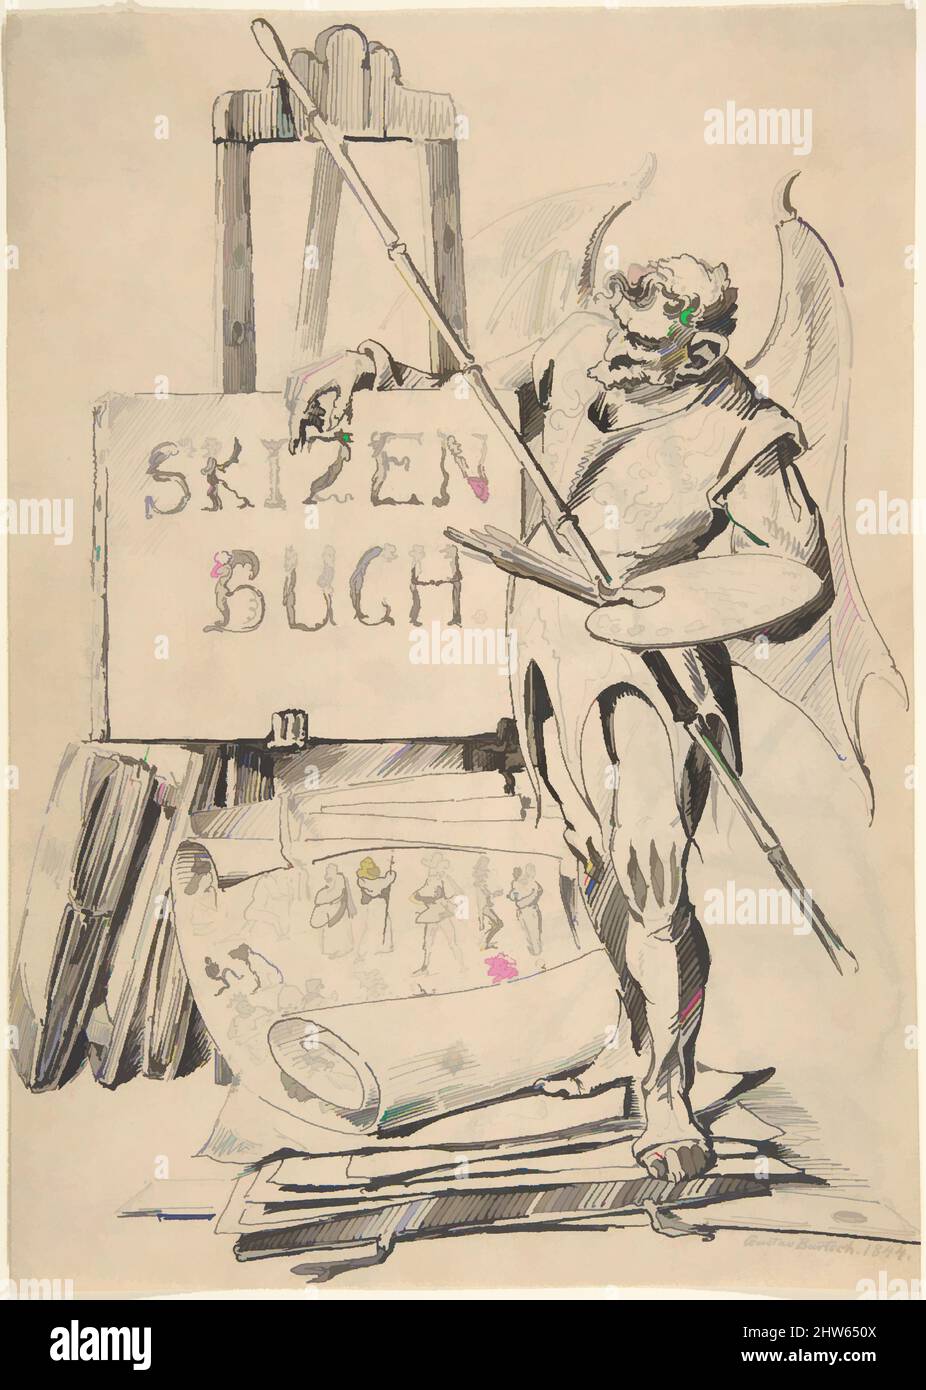 Art inspired by Der Fehlerteufel ('Devil of Mistakes'), 1844, Pen and black ink over graphite, 9 1/4 x 6 1/2 in. (23.5 x 16.5 cm), Drawings, Gustav Bartsch (German, Gleiwitz (Oberschlesien) ca. 1821–after 1870 Dresden-Blasewitz, Classic works modernized by Artotop with a splash of modernity. Shapes, color and value, eye-catching visual impact on art. Emotions through freedom of artworks in a contemporary way. A timeless message pursuing a wildly creative new direction. Artists turning to the digital medium and creating the Artotop NFT Stock Photo